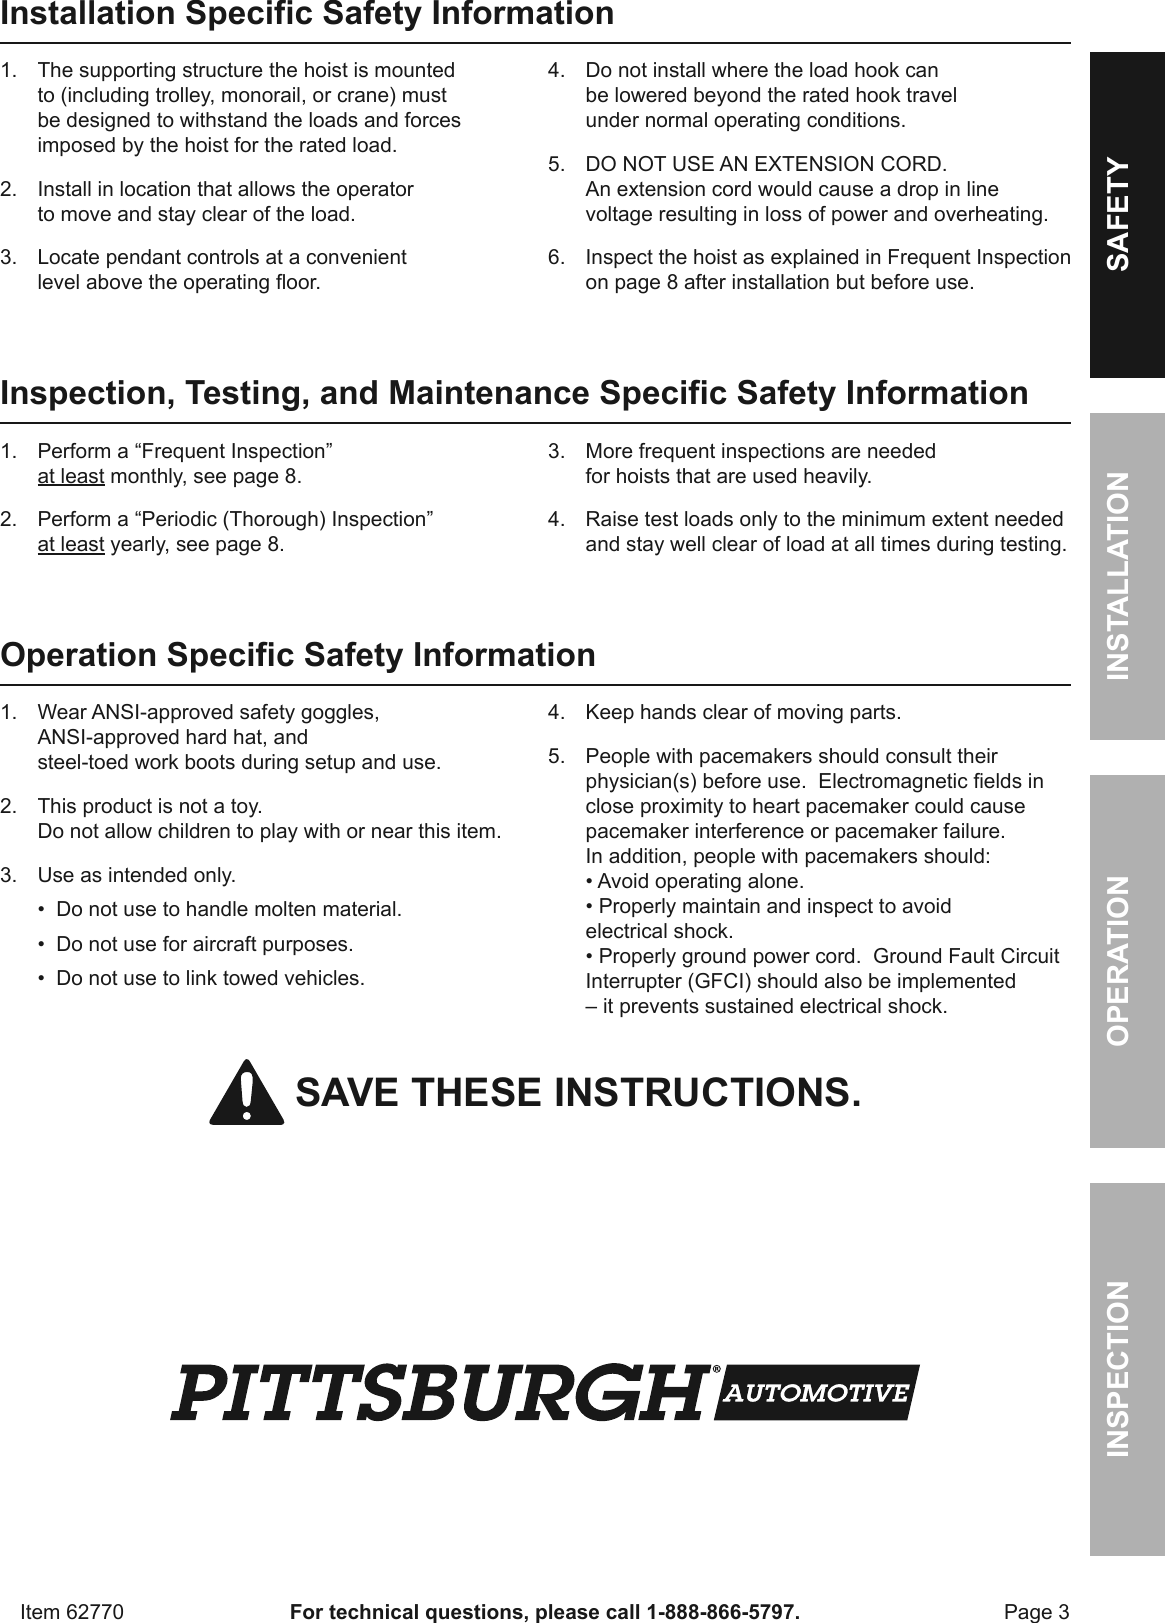 Page 3 of 12 - Manual For The 62770 2000 Lb. Electric Hoist With Remote Control